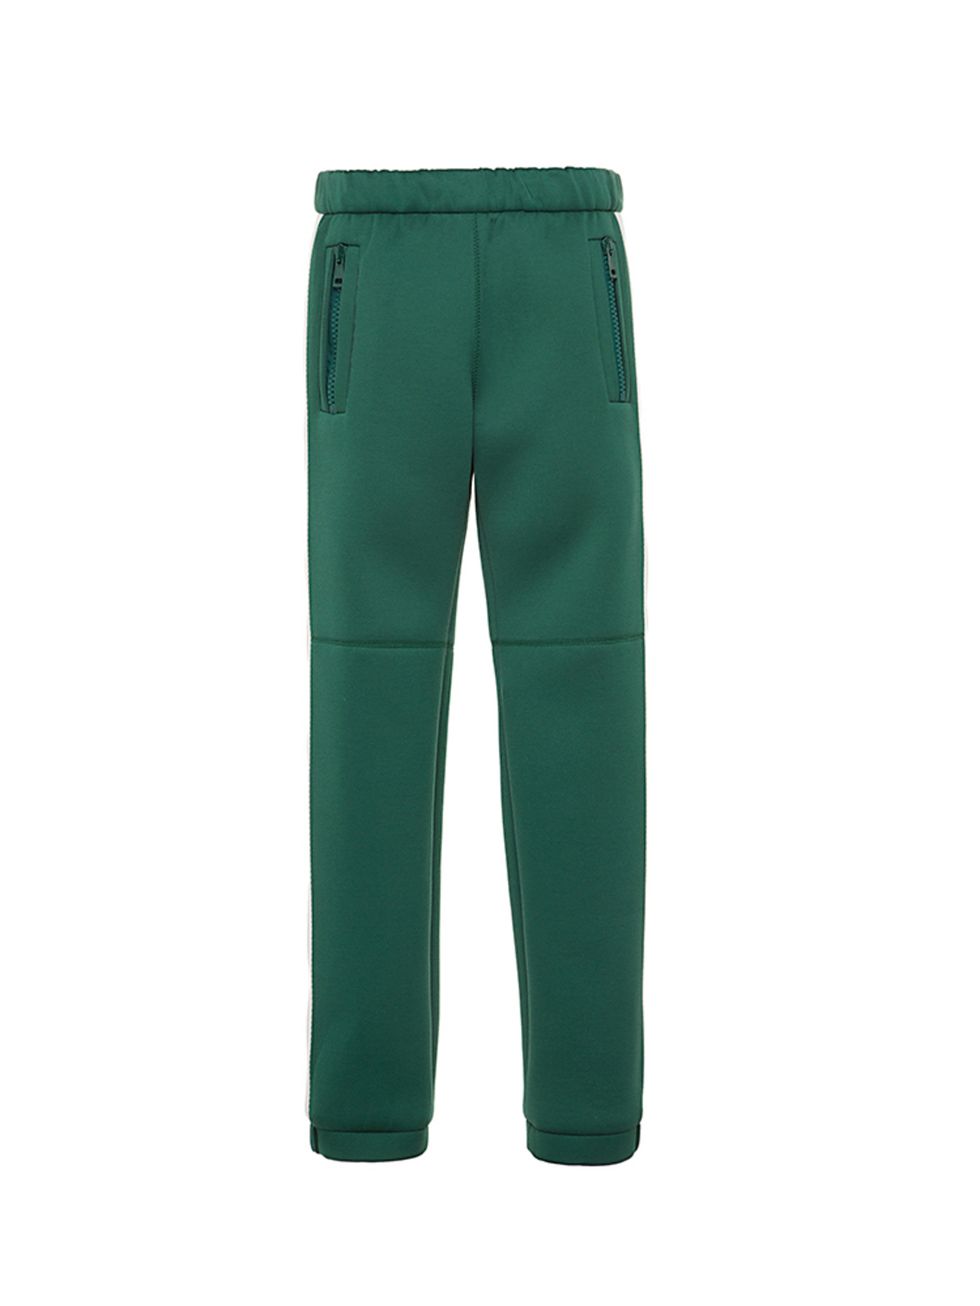 <p>Fashion Assistant Bo Houtenbos is investing in a pair of confortable trousers. </p>

<p><a href="http://www.bimbaylola.com/shoponline/product.php?id_product=12000&id_category=847&sav=1" target="_blank">Bimba y Lola</a> trousers, £230</p>